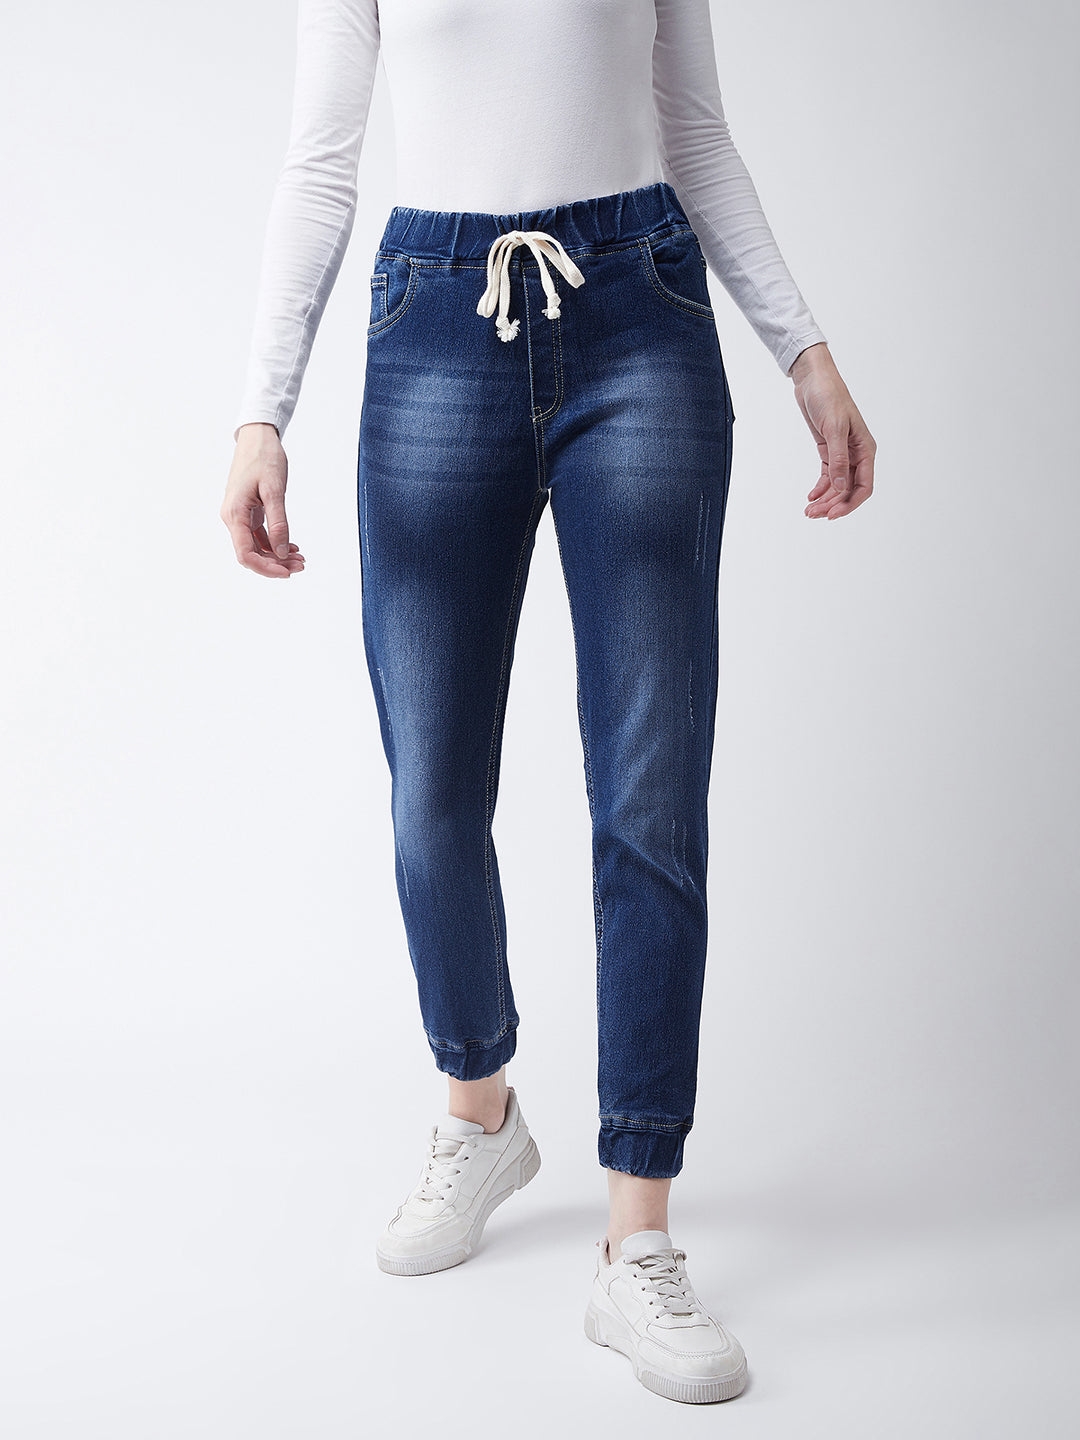 MISS CHASE | Navy Blue Relaxed Fit Mid Rise Regular Length Scraped Denim Stretchable Jogger Pants